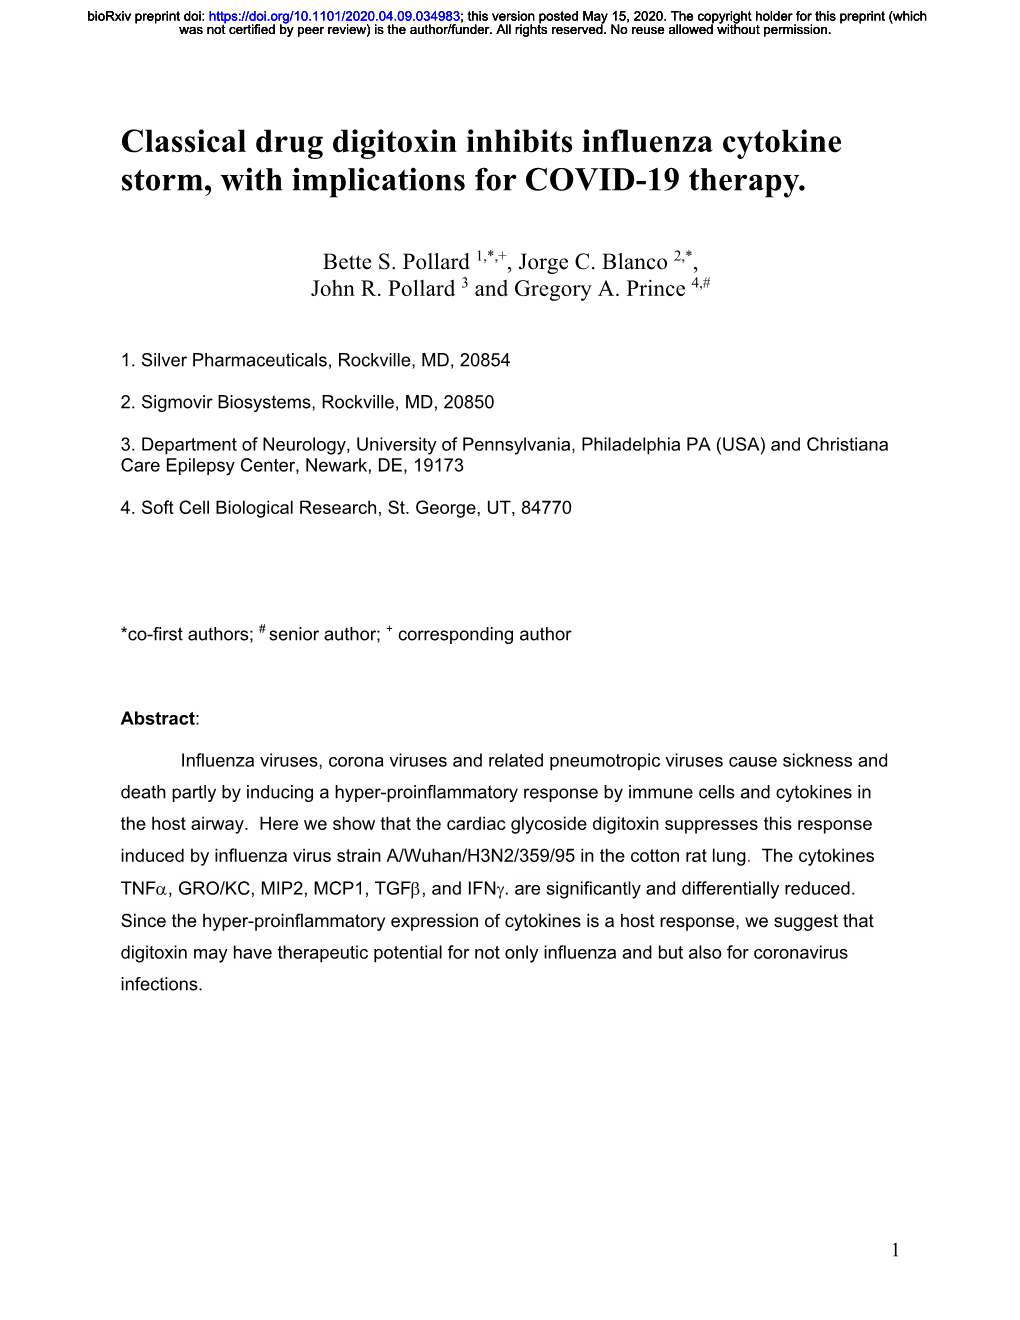 Classical Drug Digitoxin Inhibits Influenza Cytokine Storm, with Implications for COVID-19 Therapy